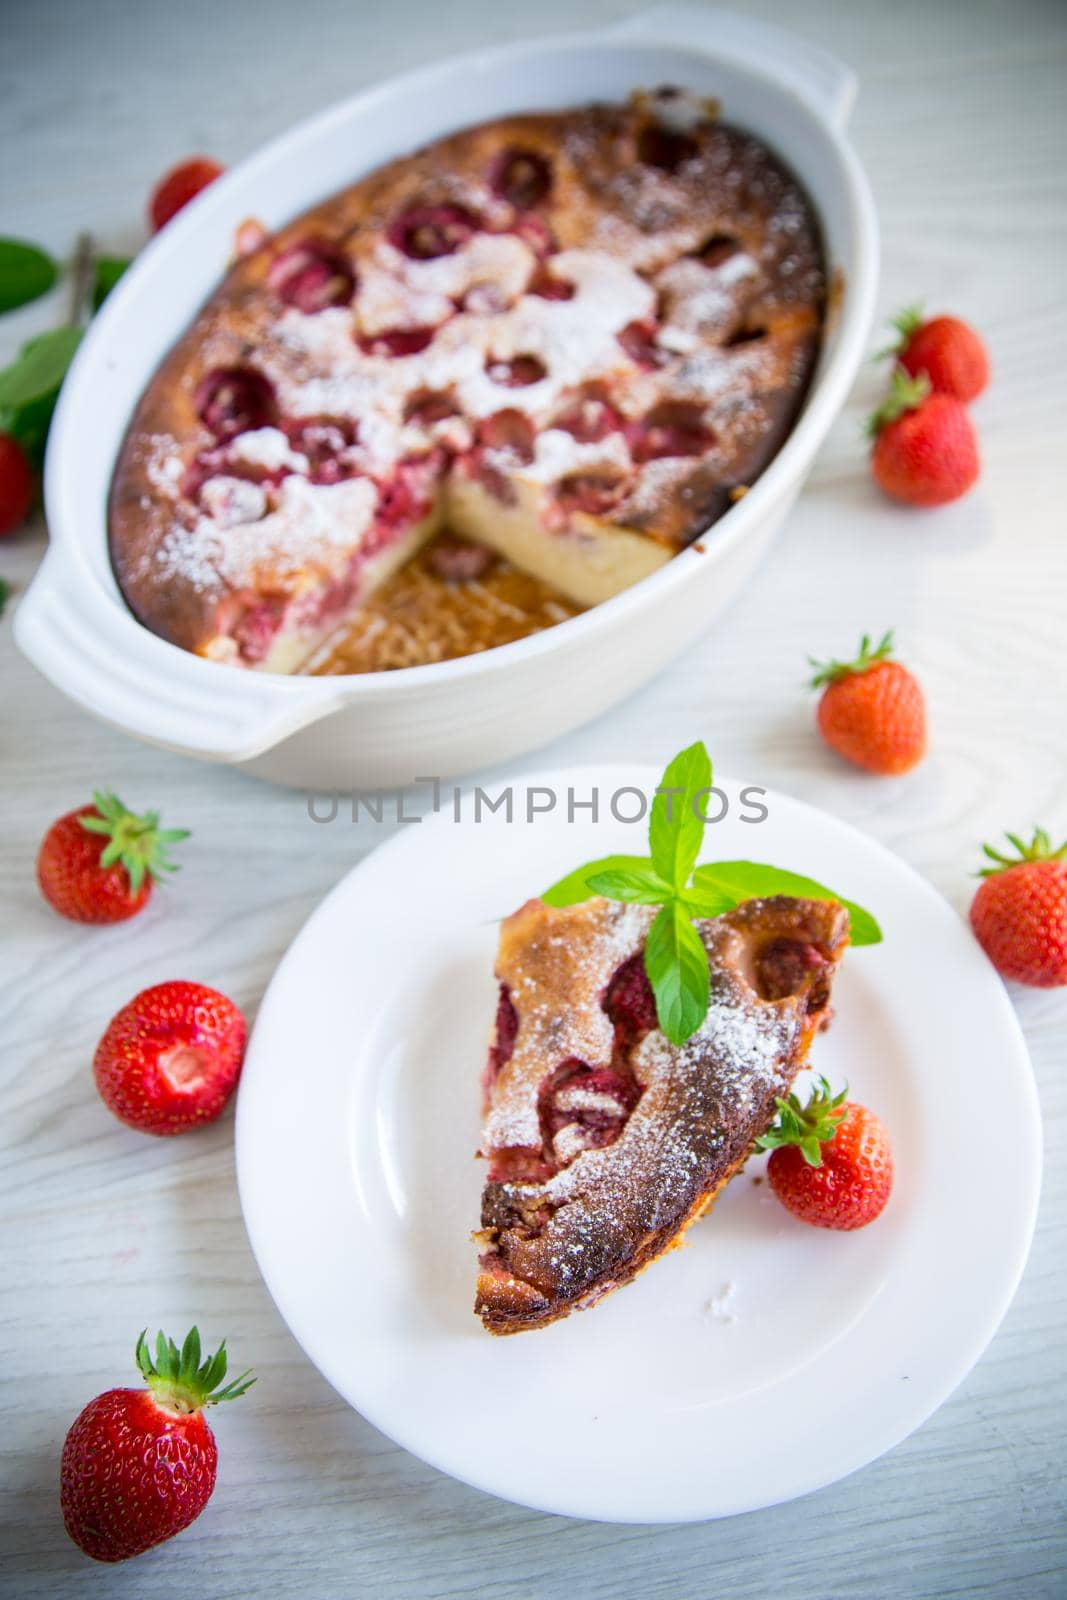 Sweet cottage cheese casserole with strawberry filling by Rawlik